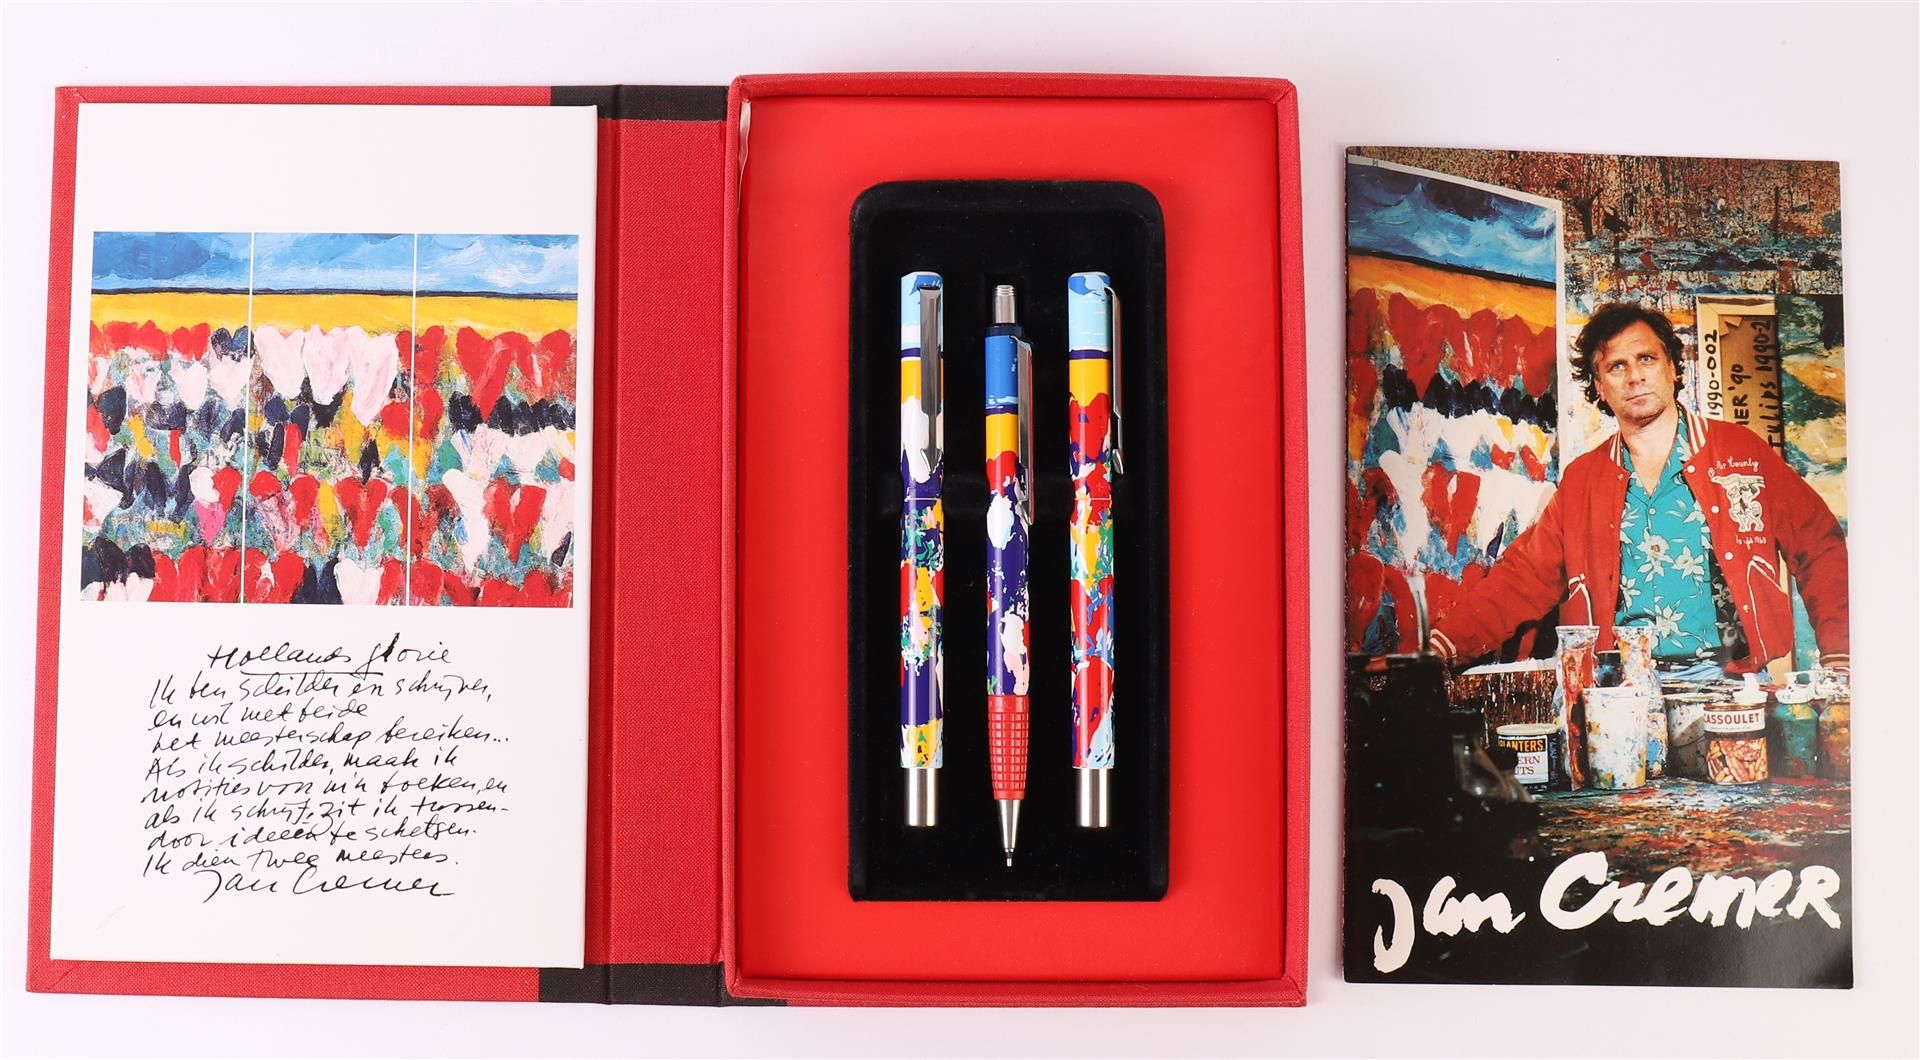 A Parker pen set: Hollands Glorie - Jan Cremer 1991. Folder in the shape of a book with a fountain